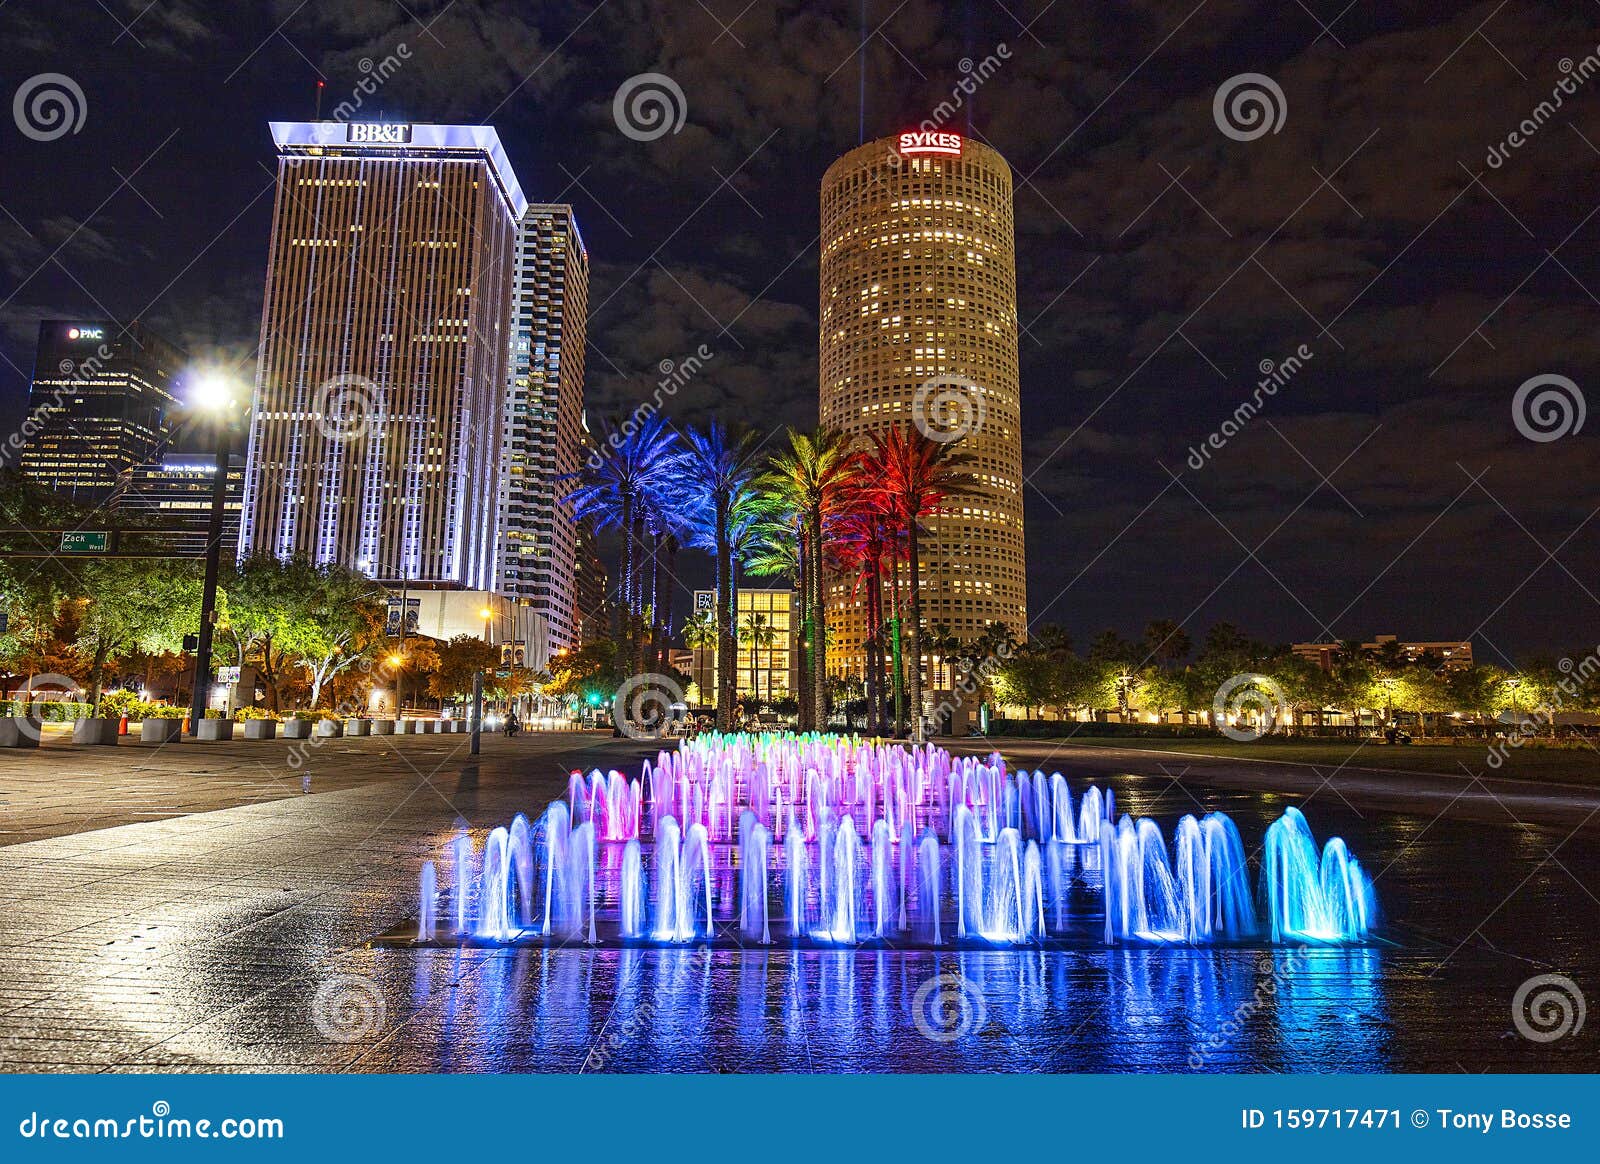 Curtis Hixon Park at Night, with Water Feater Illuminated Editorial